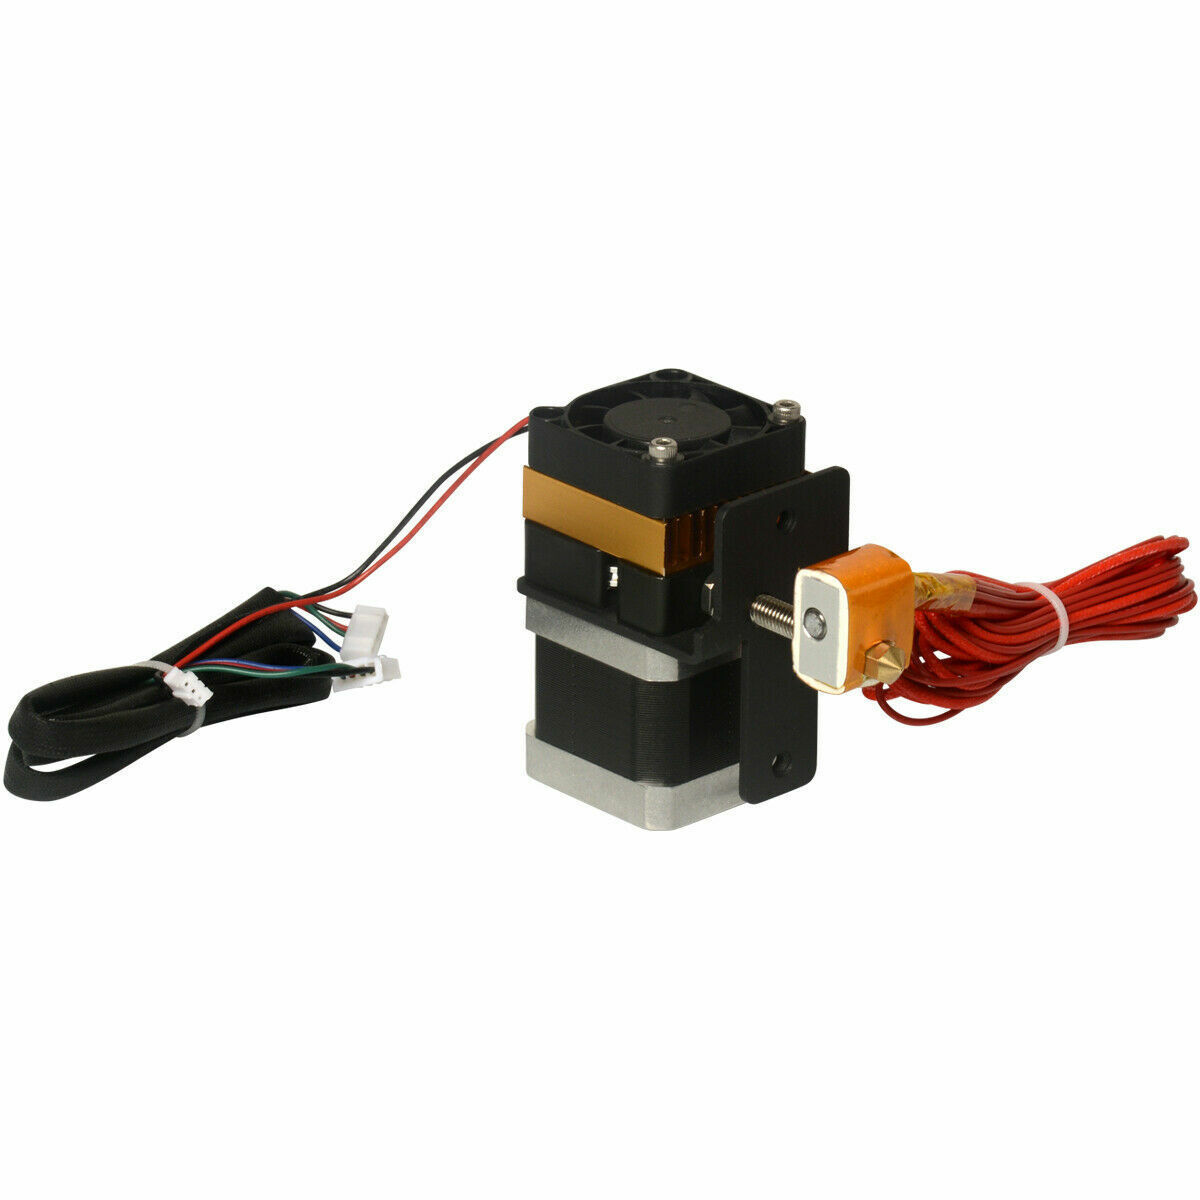 Geeetech Assembled MK8 Redesigned Extruder 0.3mm nozzle for 1.75mm PLA/ABS Sale